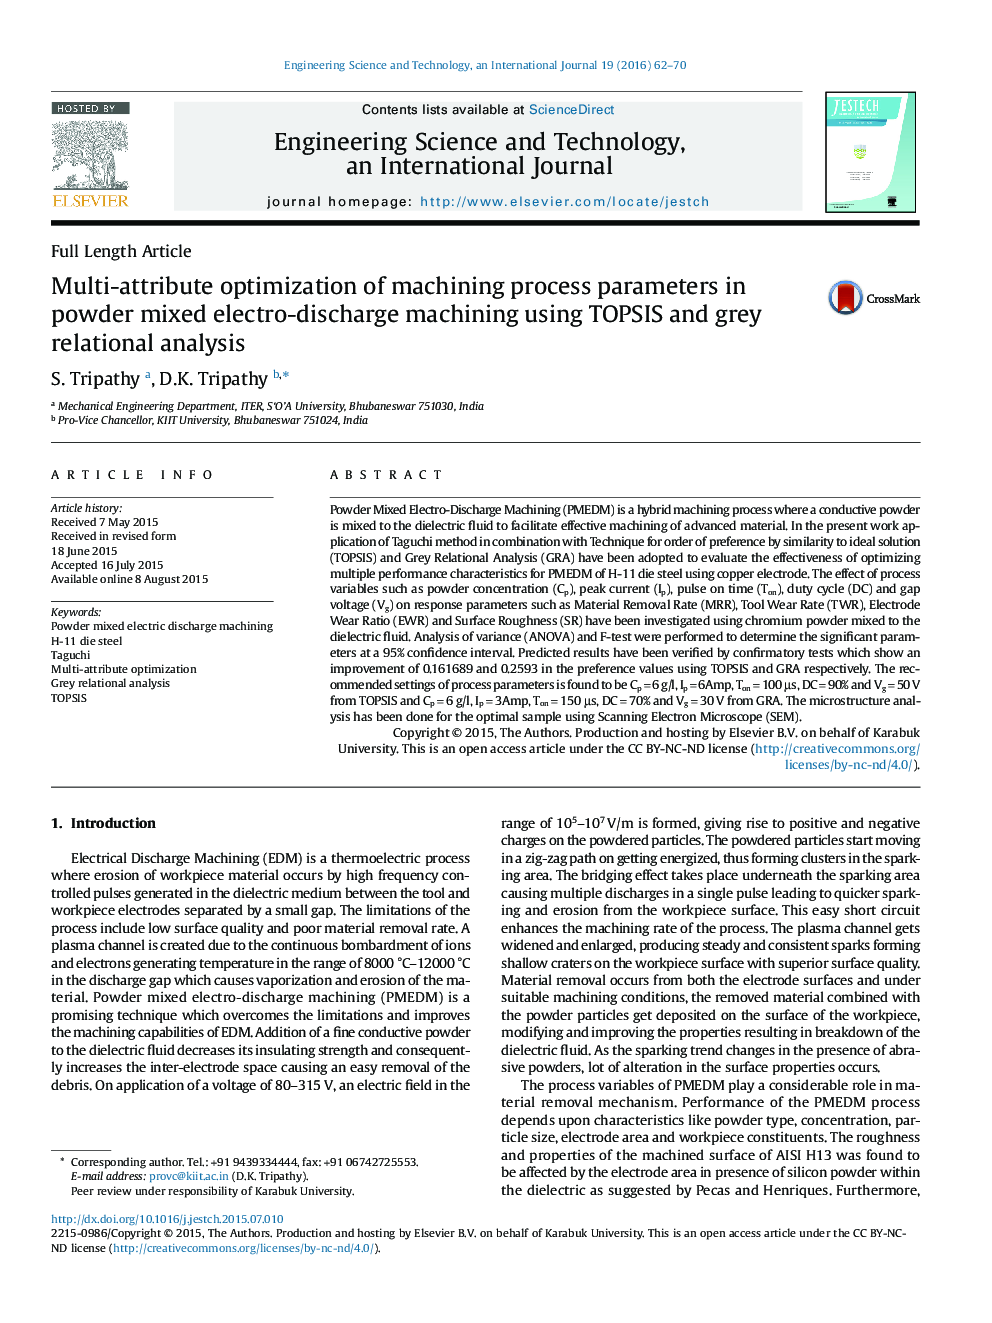 Multi-attribute optimization of machining process parameters in powder mixed electro-discharge machining using TOPSIS and grey relational analysis 